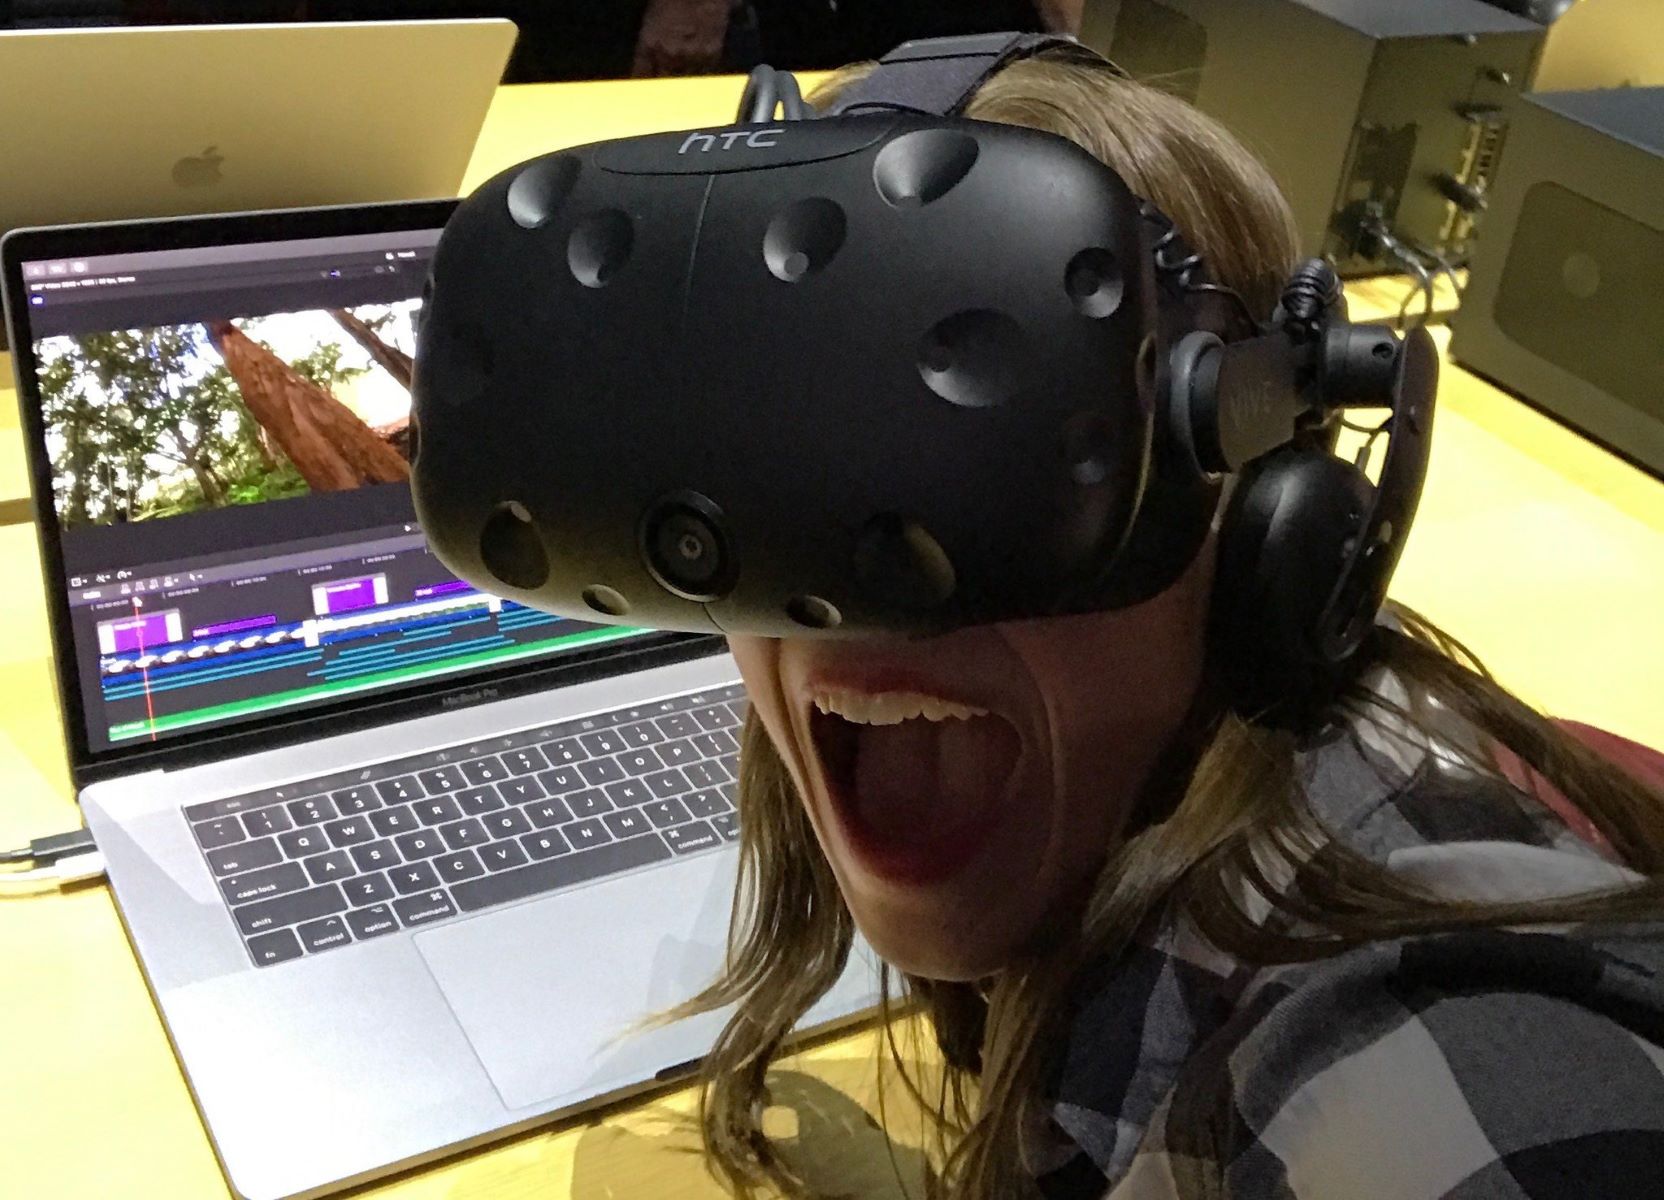 How Do I Get HTC Vive To Run On My Mac Now